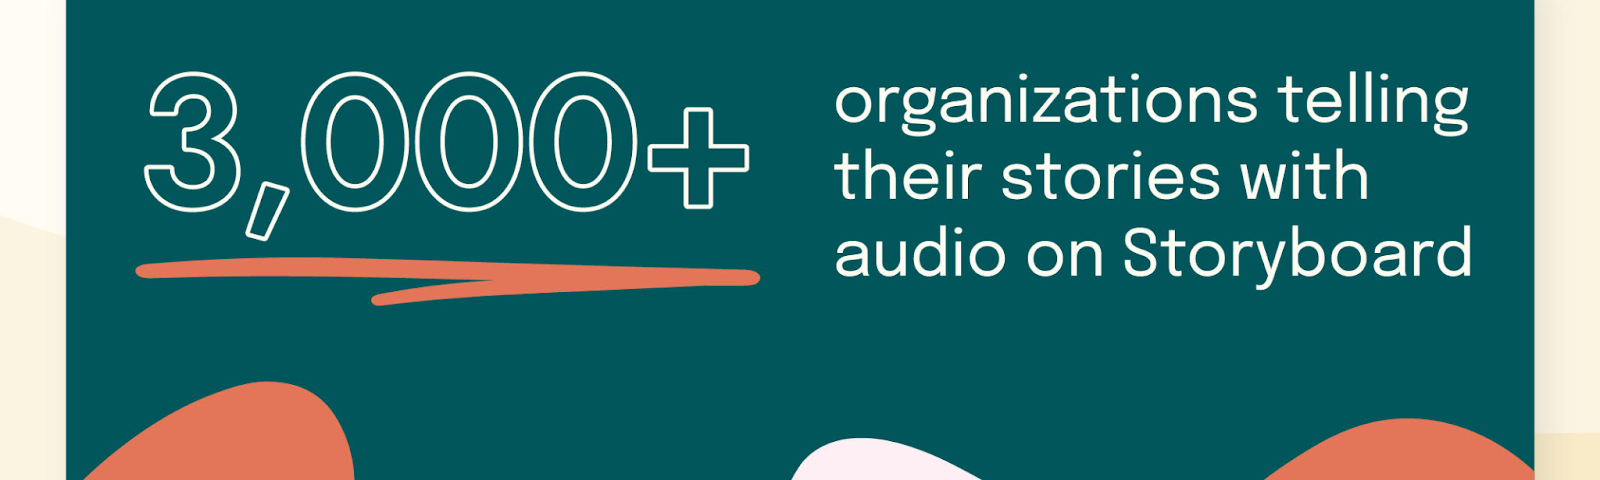 Over 3,000 organizations have launched private podcast channels on Storyboard